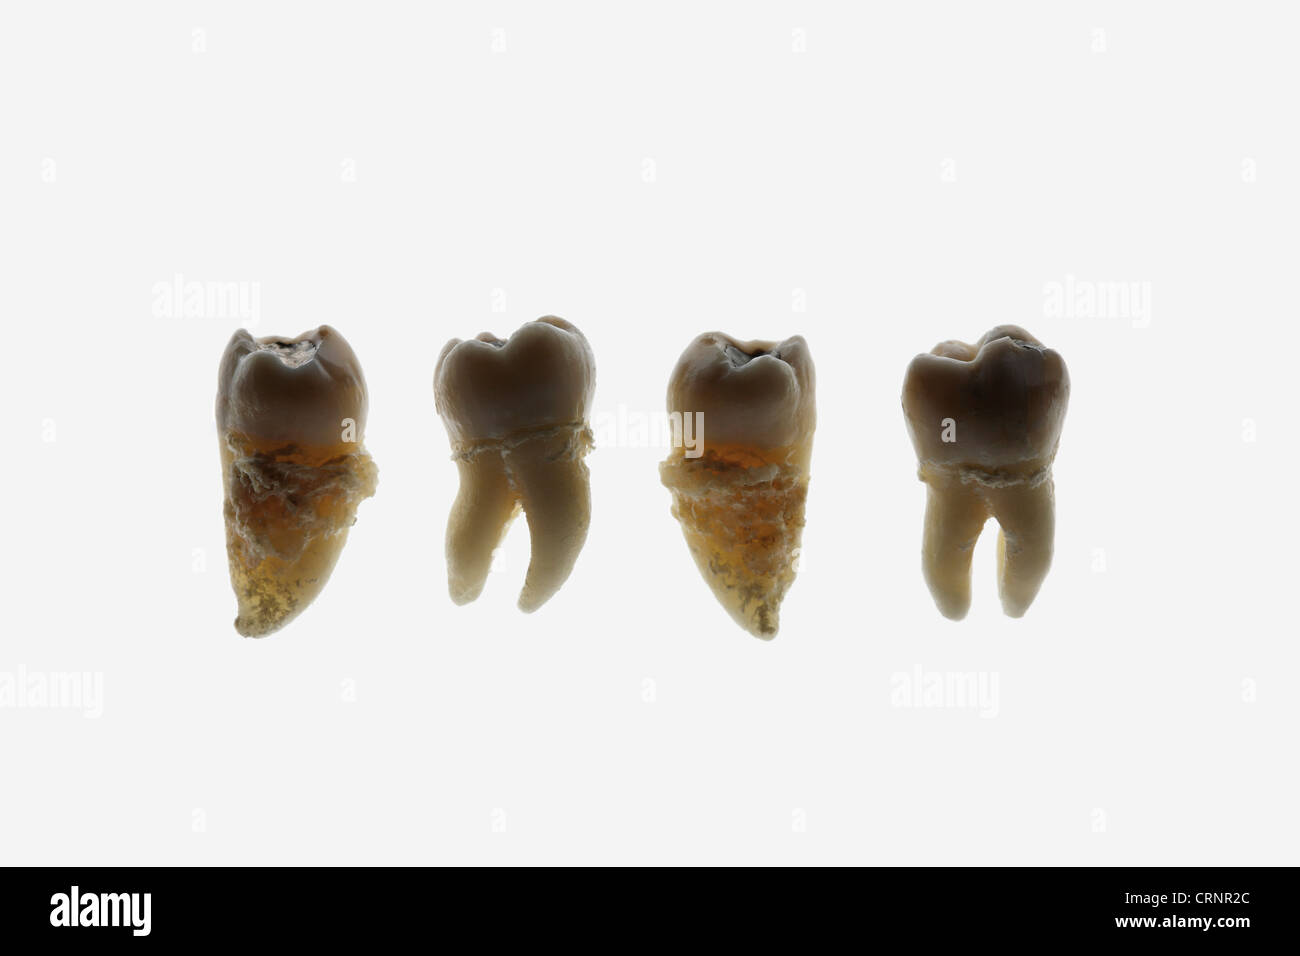 Four extracted human teeth on white background Stock Photo